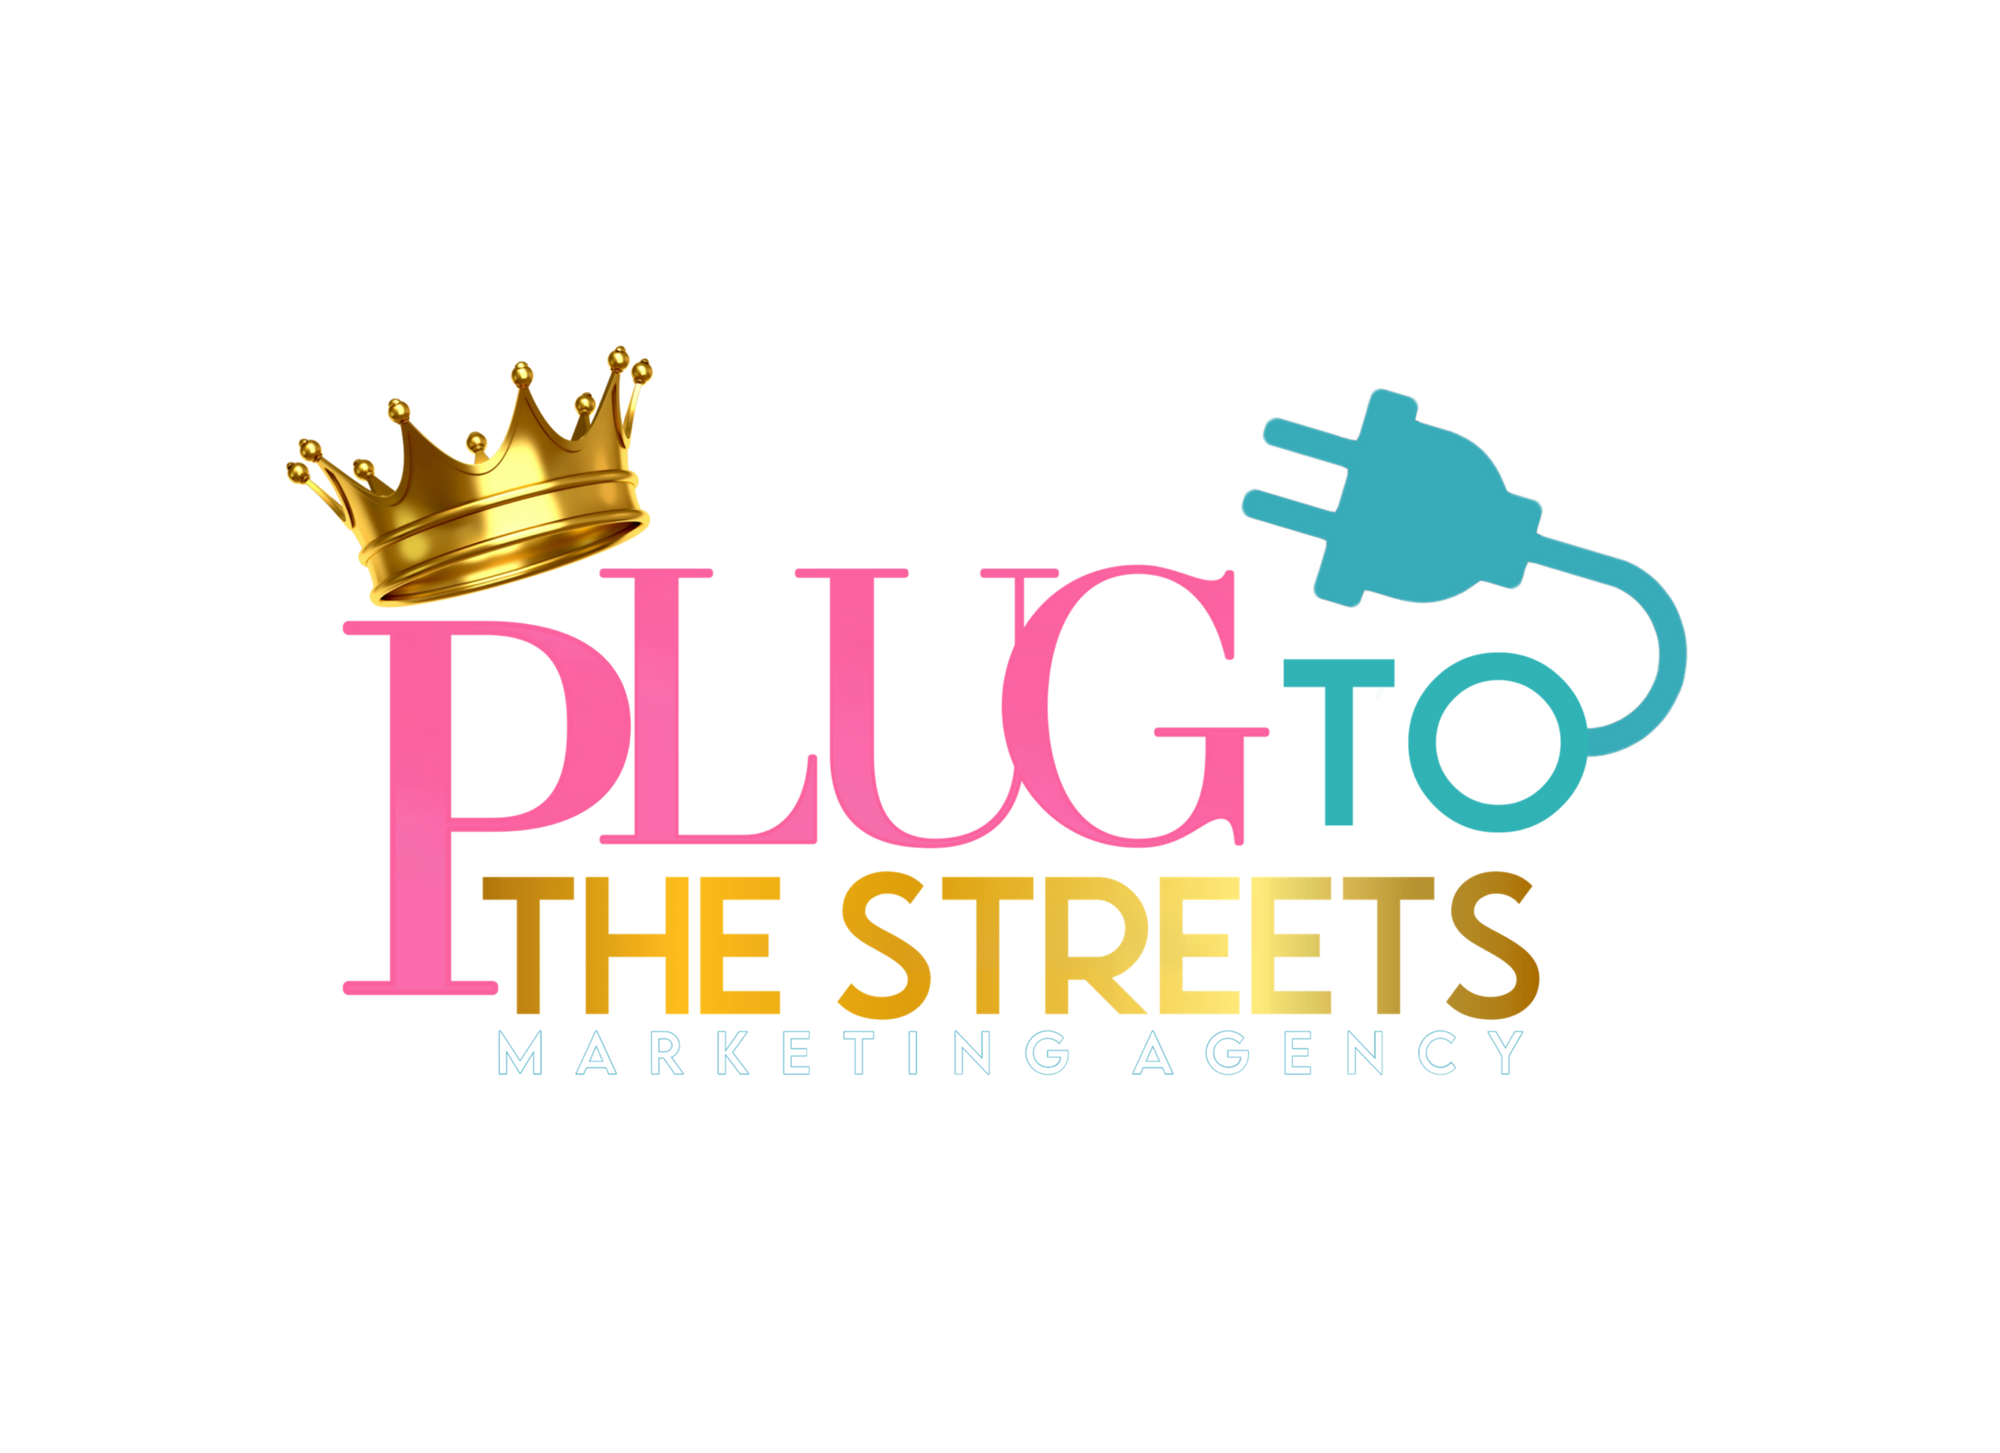 All About Marketing! - Plug To The Streets